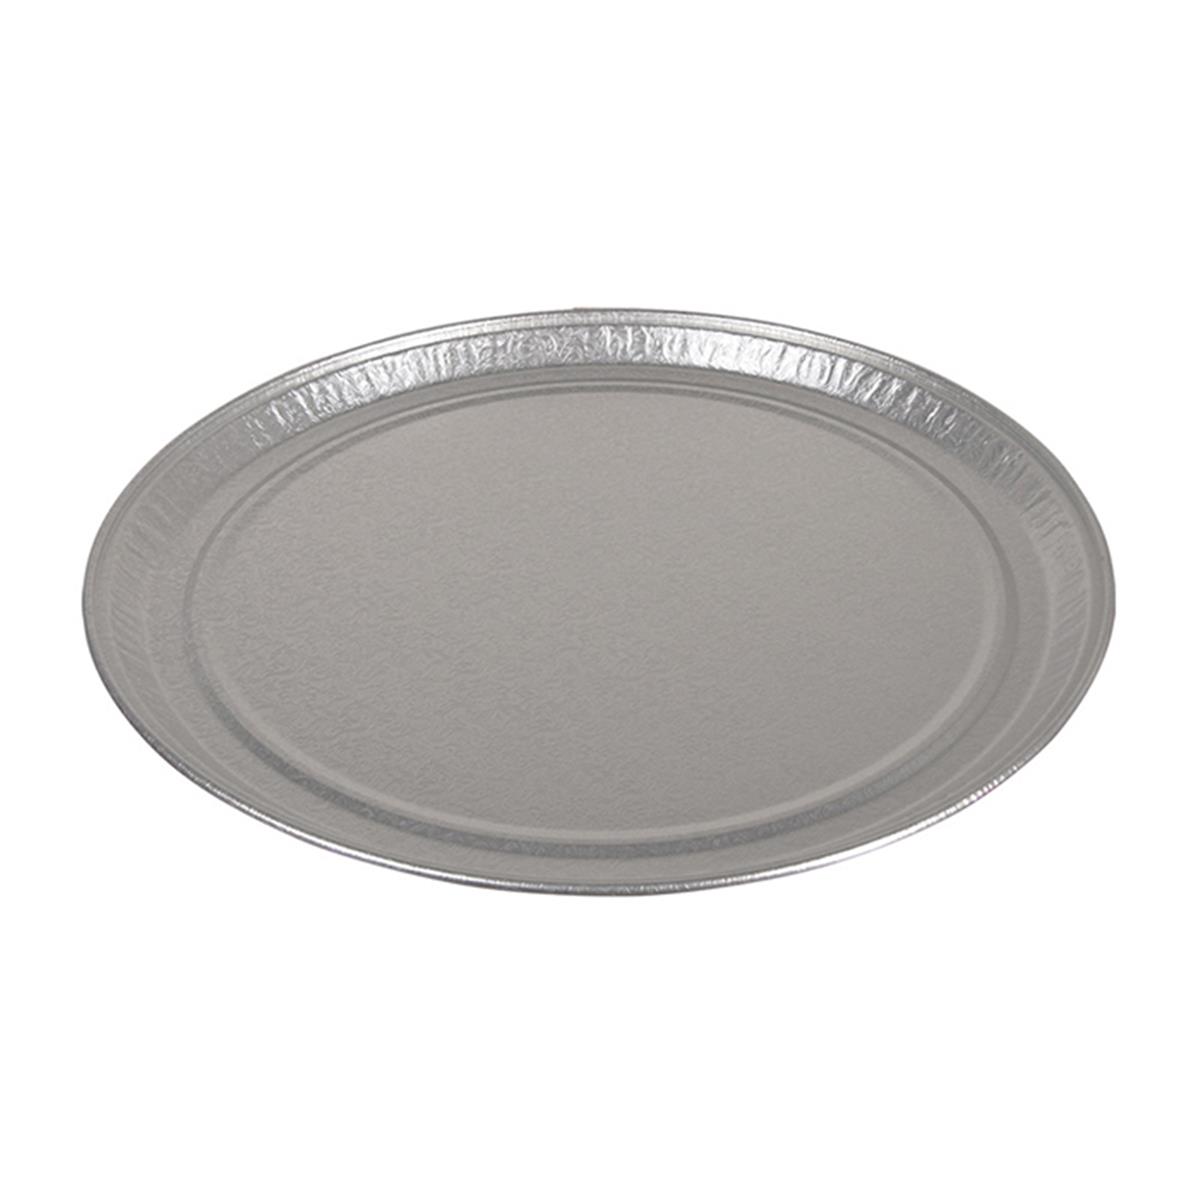 451612a Pe 16 In. Aluminum Round Flat Catering Tray - Case Of 50